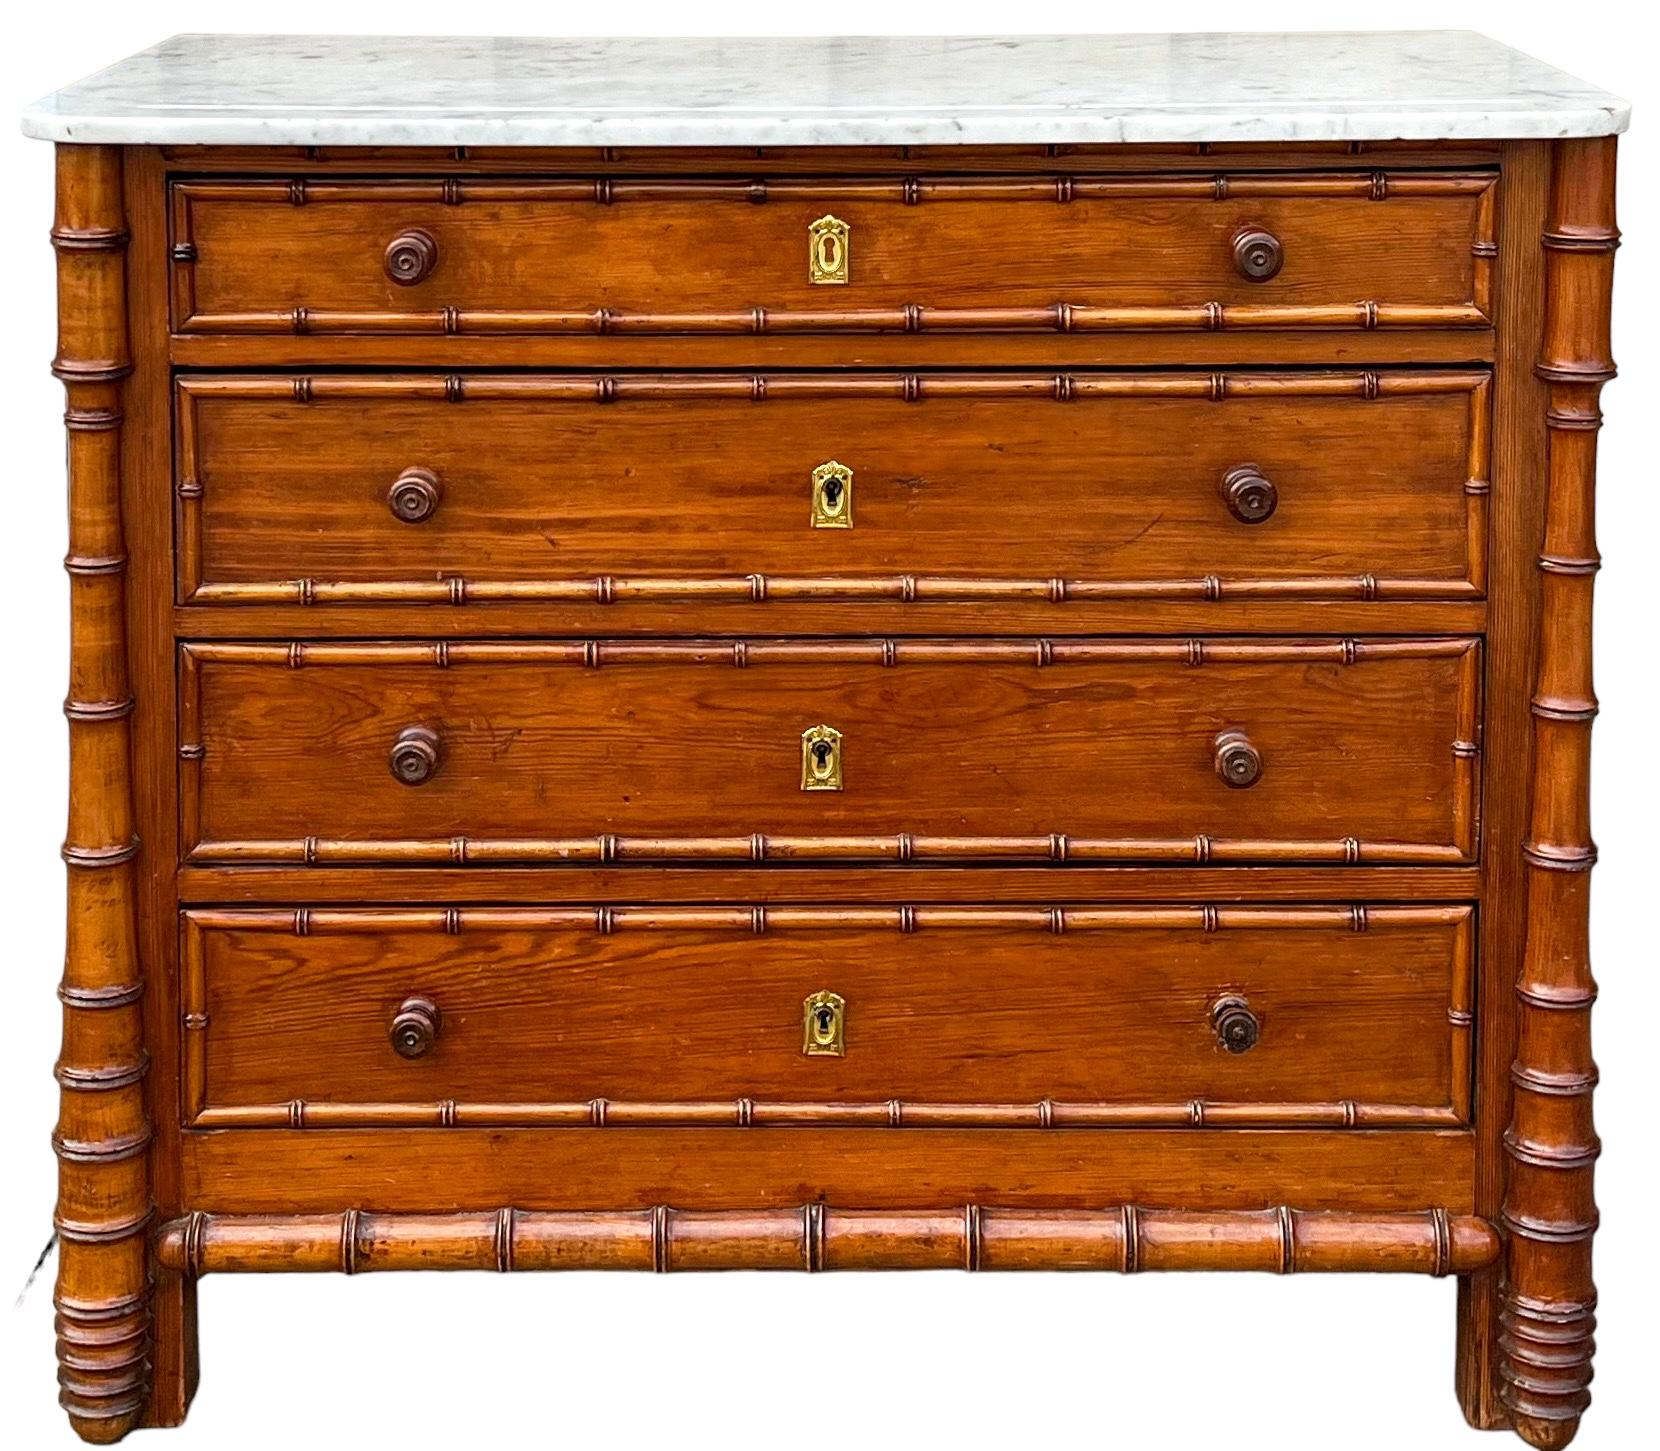 19th-C. French Aesthetic Movement Faux Bamboo Pine & Marble Chest / Commode For Sale 3